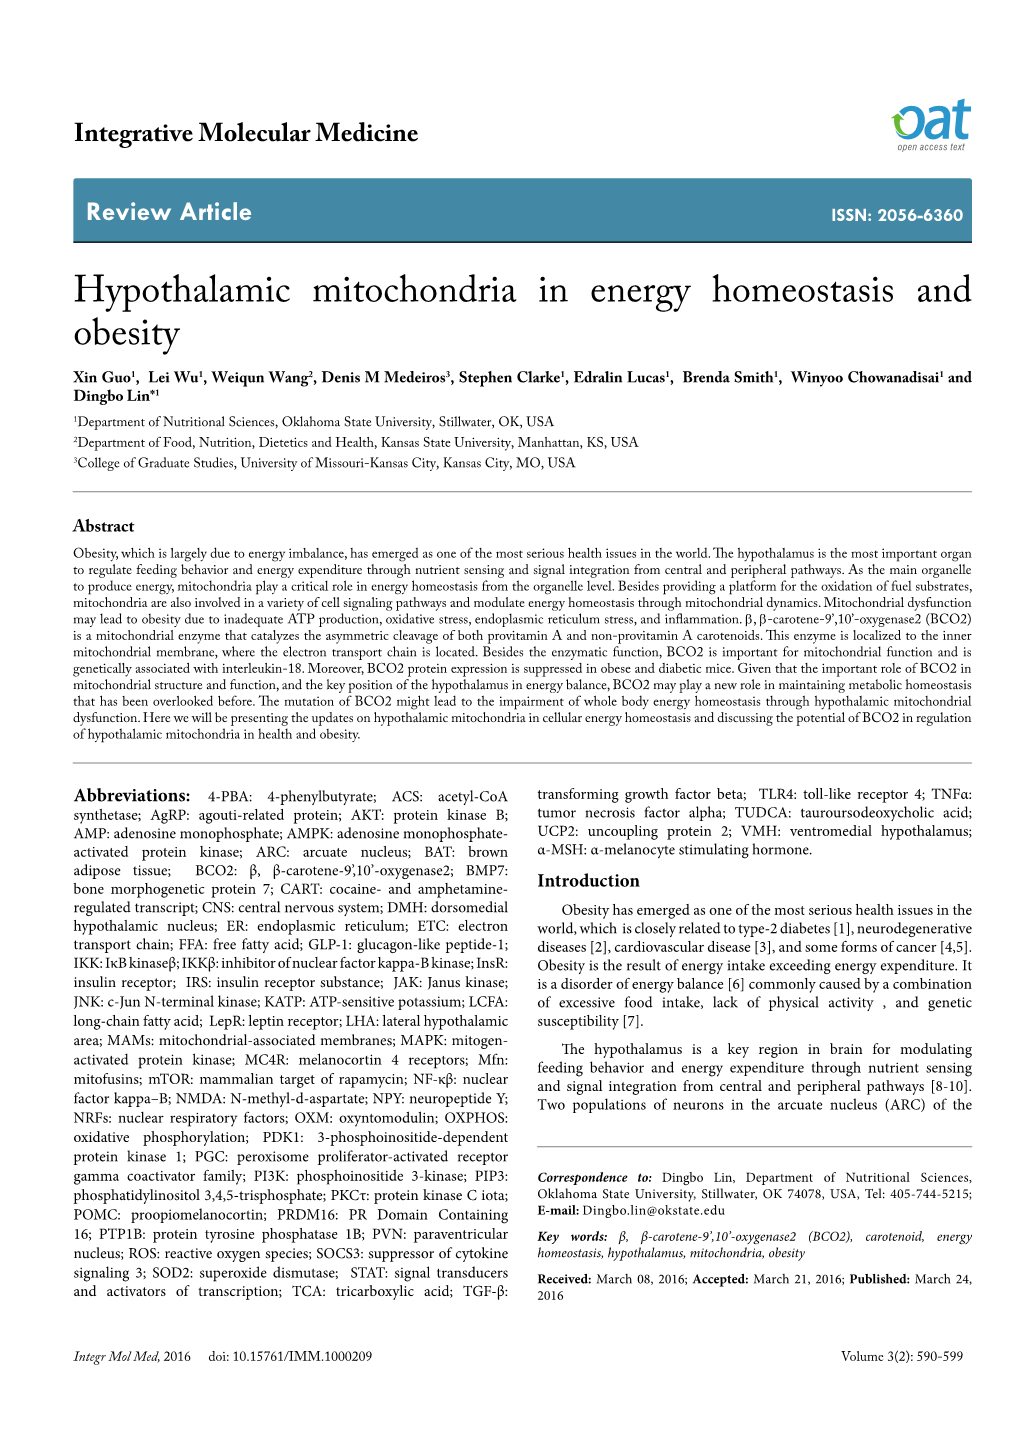 Hypothalamic Mitochondria in Energy Homeostasis and Obesity